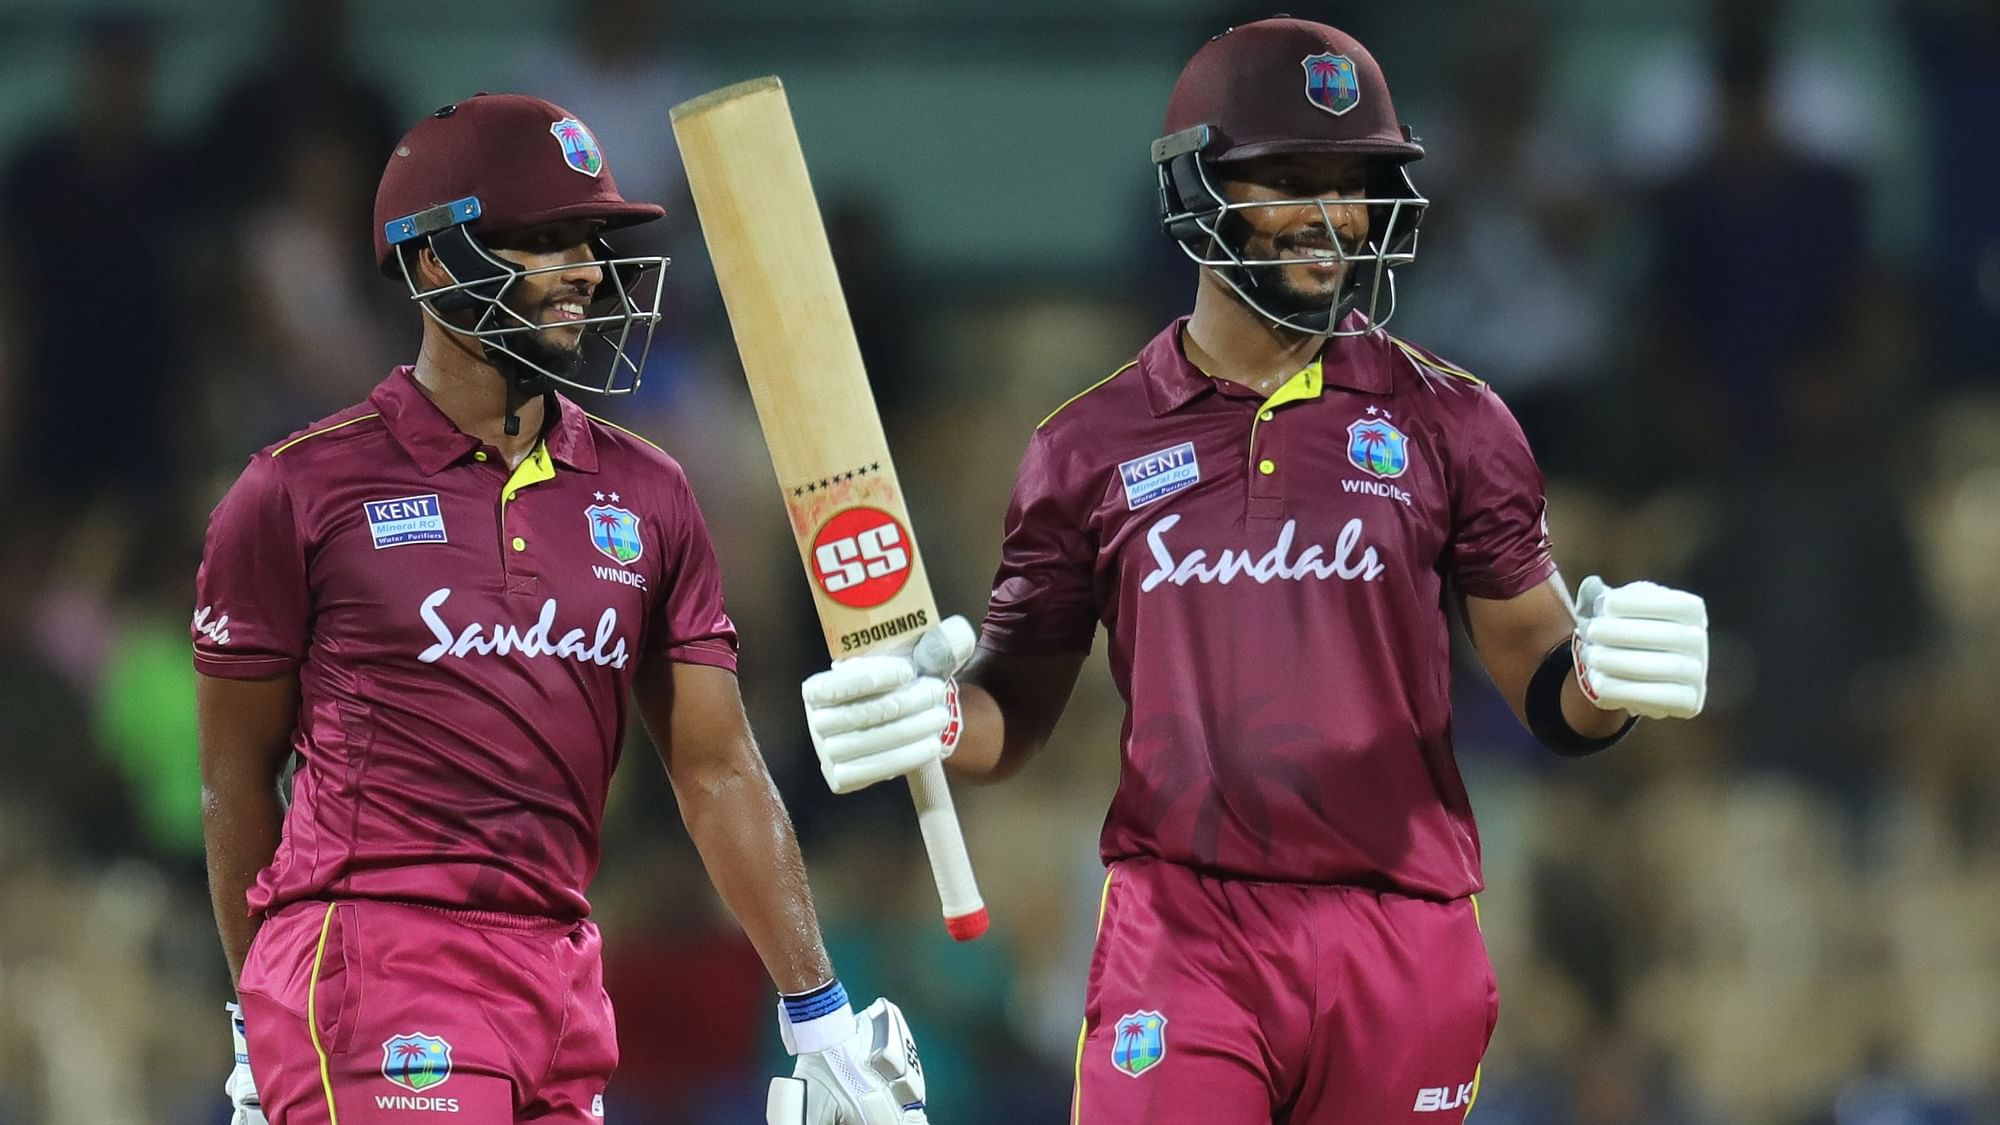 Shai Hope of West Indies celebrates his Hundred runs during the 1st One Day International match  between India and the West Indies held at the M. A. Chidambaram Stadium, Chennai on 15 December 2019.